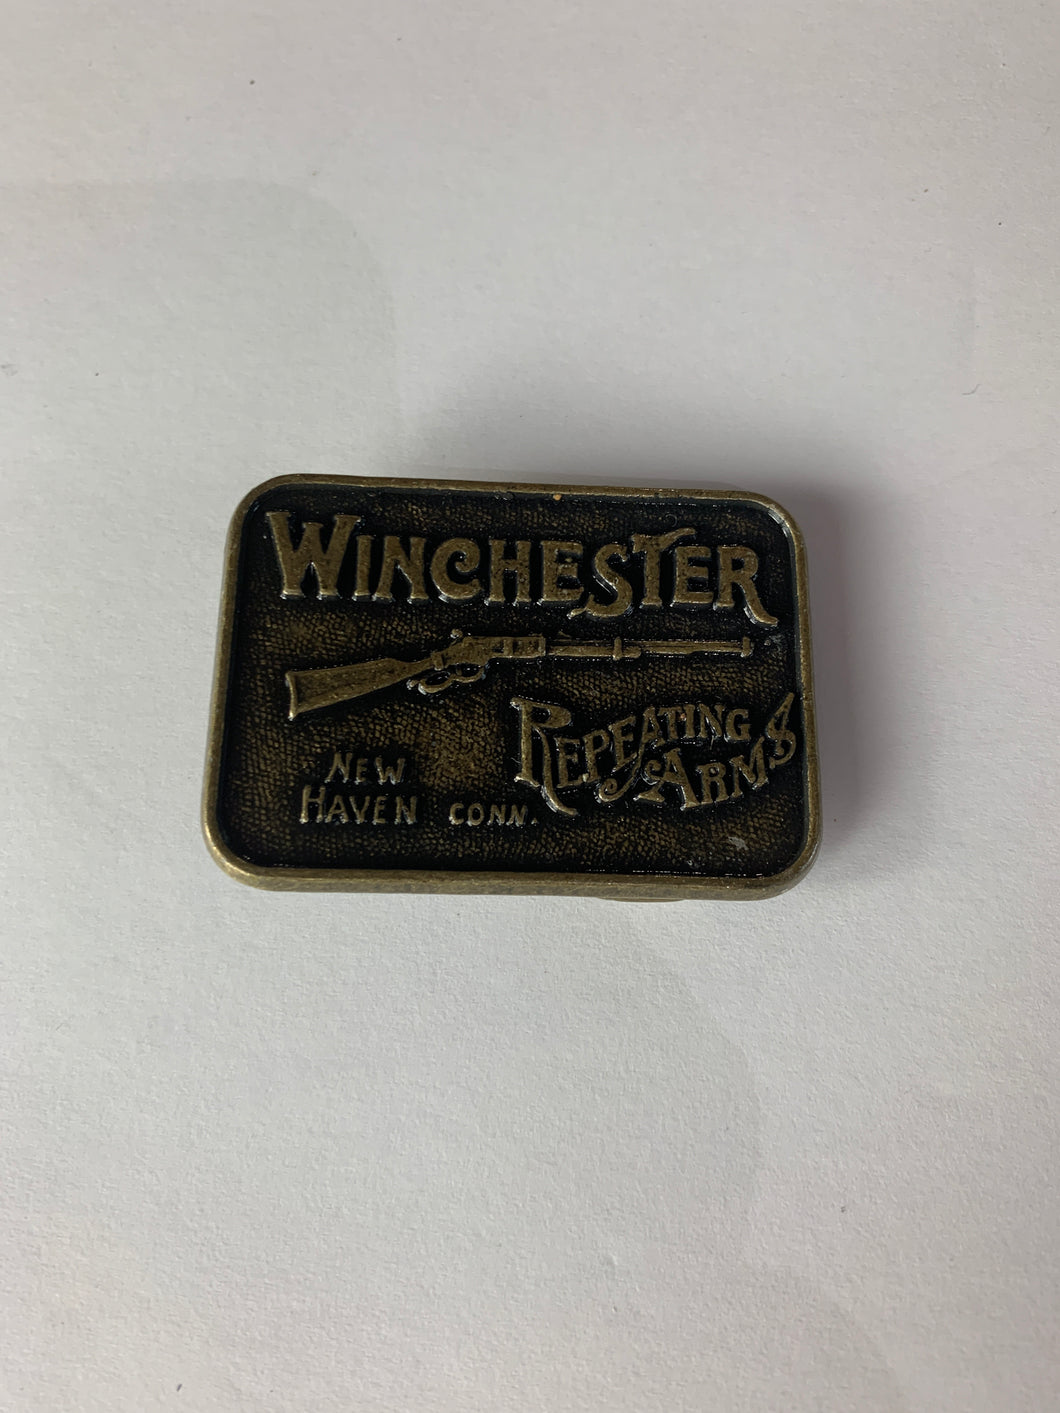 Buckle - Winchester - Repeating Arms